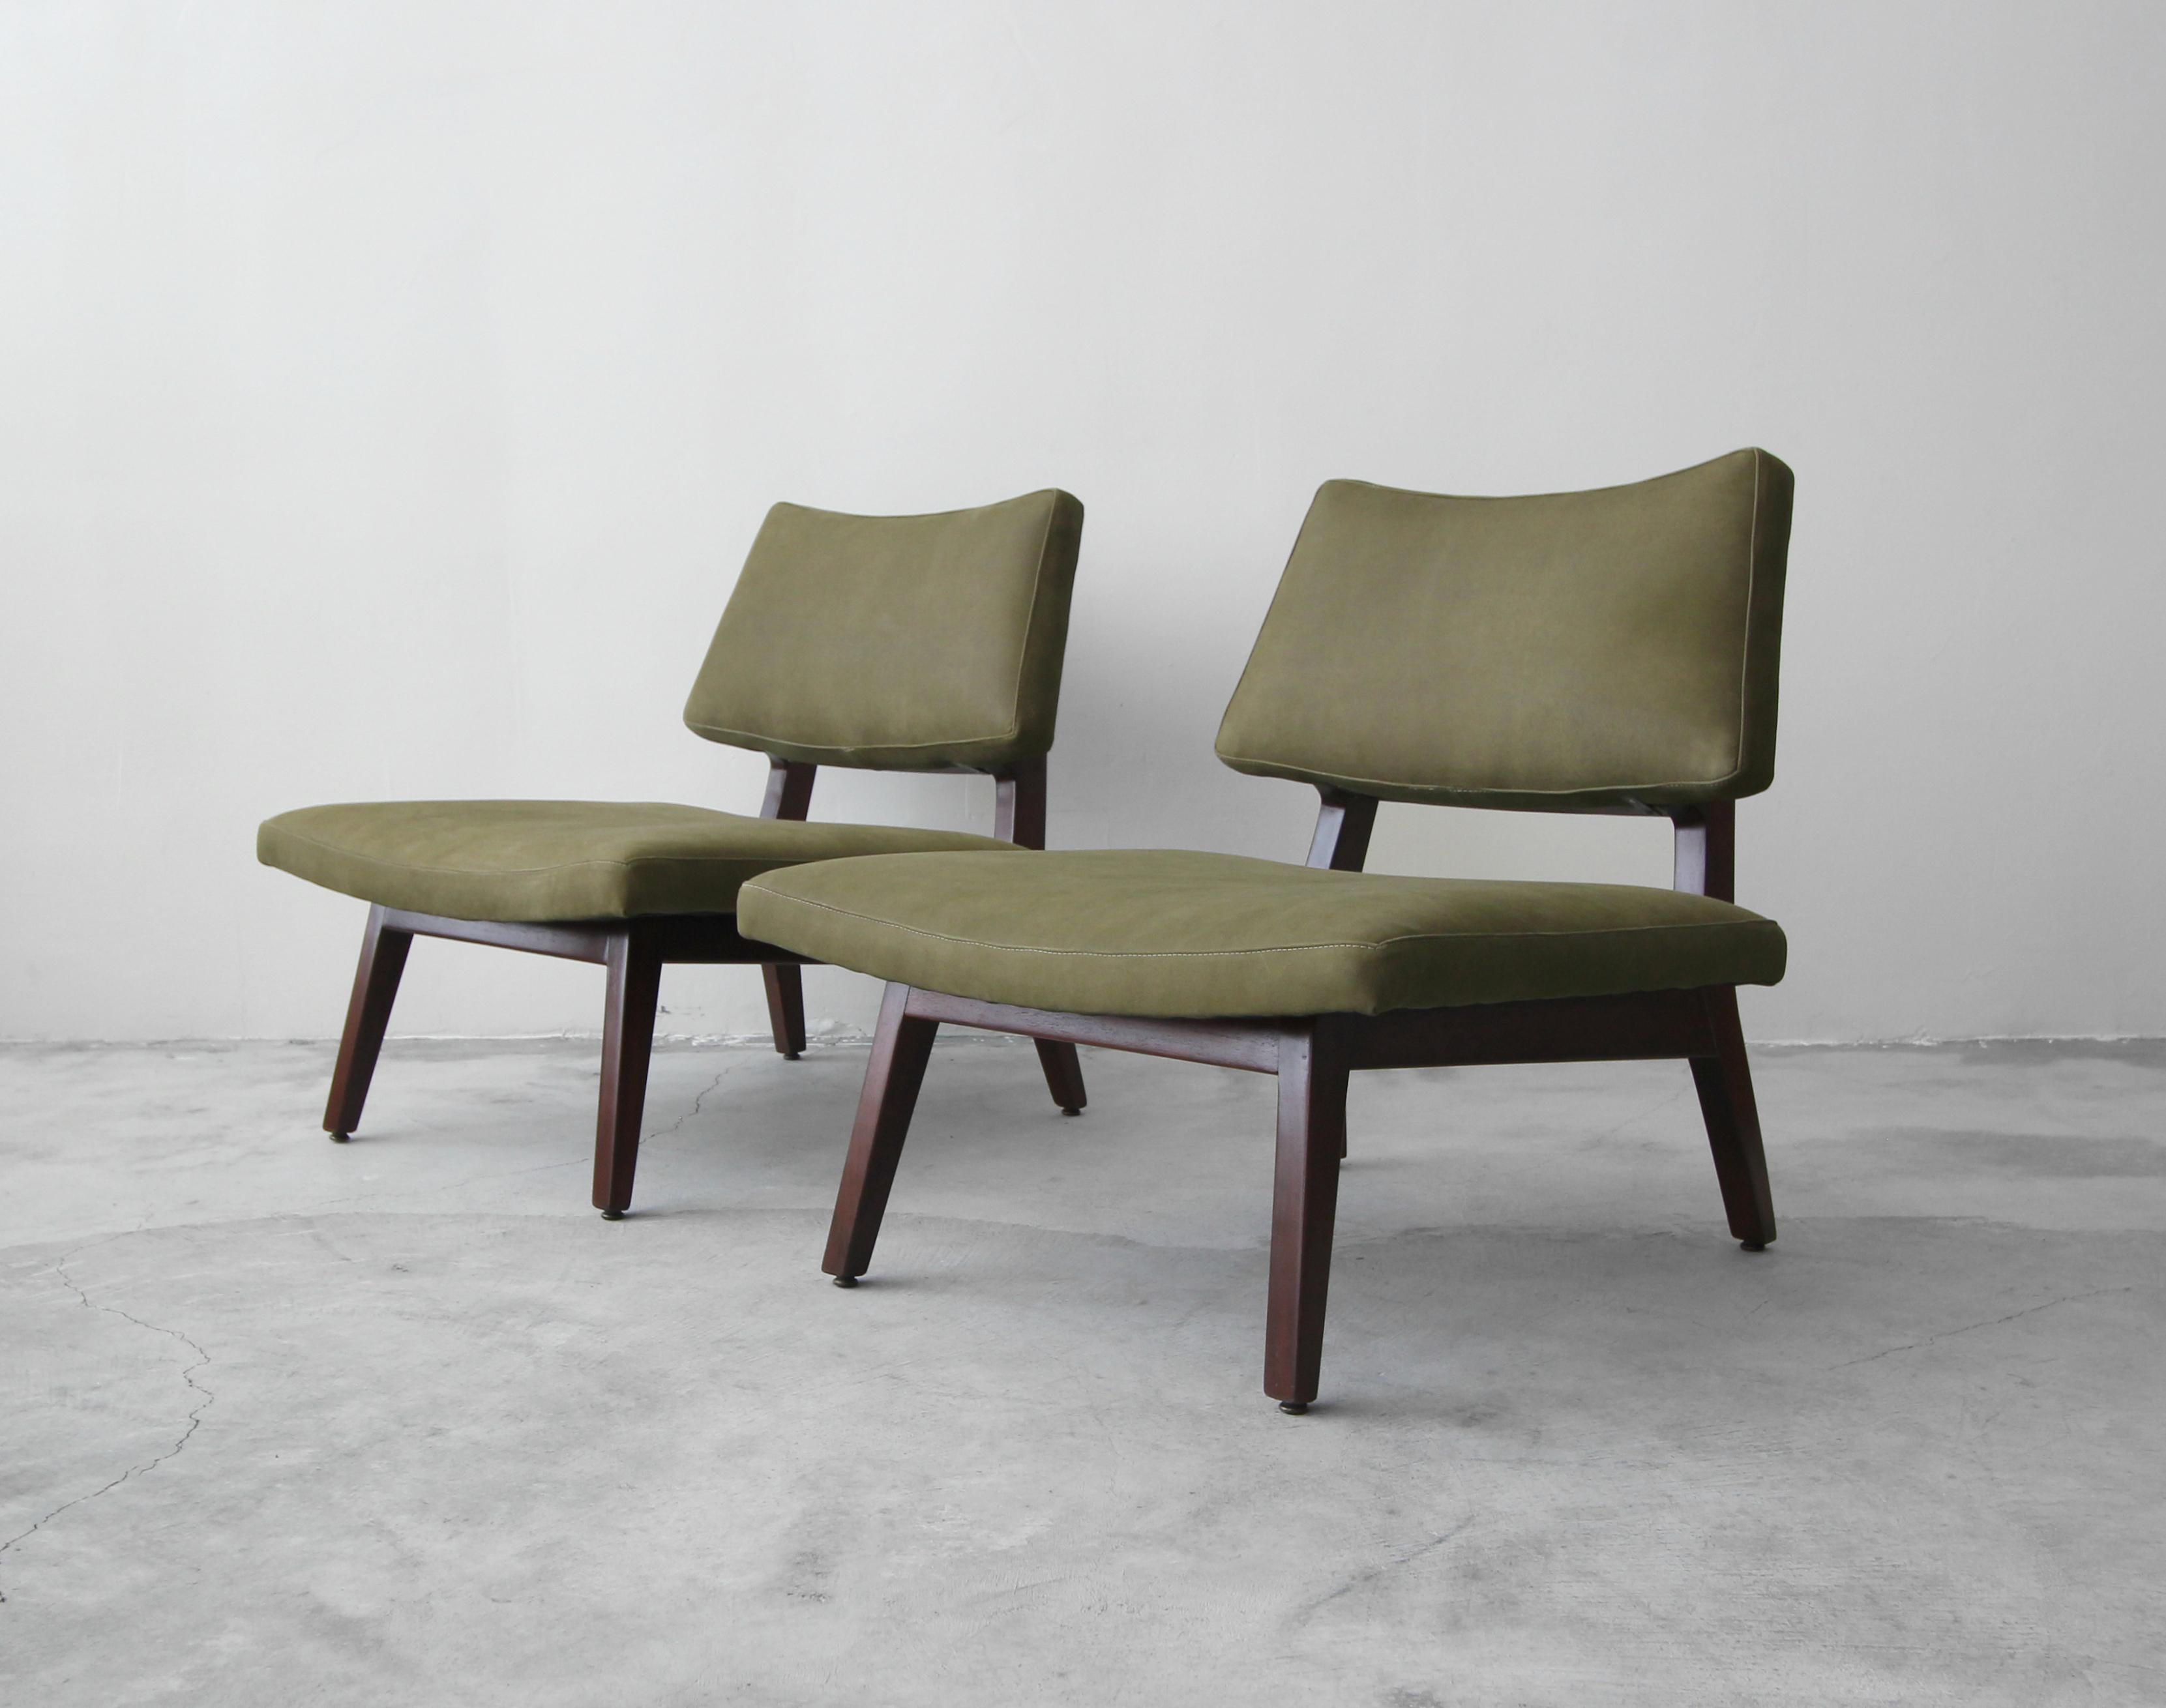 Stunning pair of sculpted side chairs by Jens Risom. A gorgeous pair of midcentury slipper style chairs with oversized seats, great curved lines and sculptural, solid walnut frames.

Professionally reupholstered in a beautiful olive green leather.